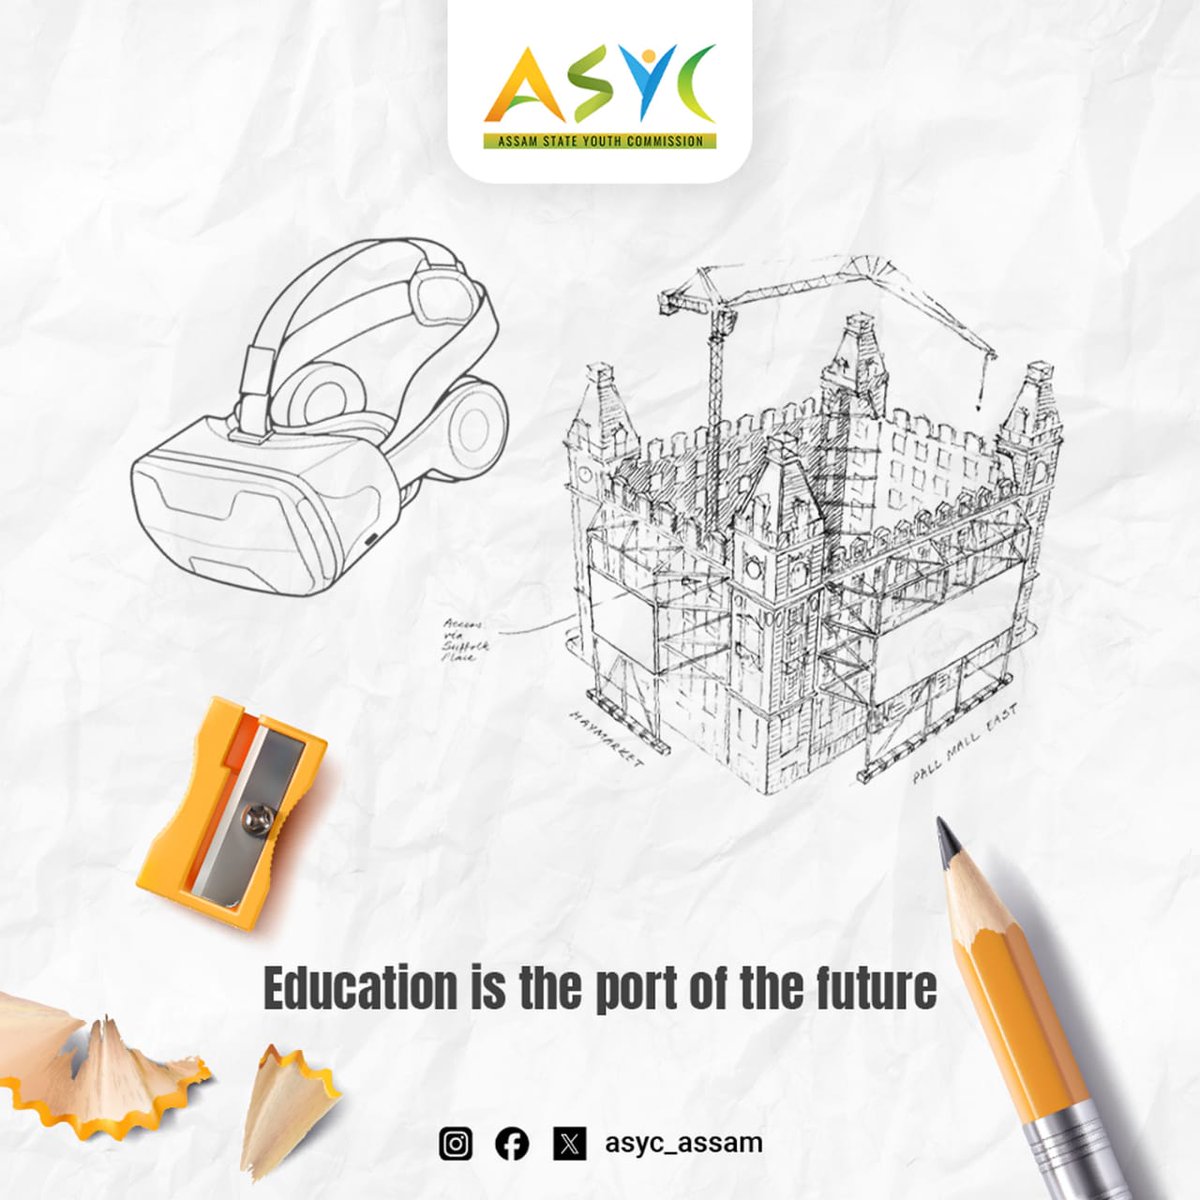 Navigating towards the future: Education, the compass guiding us to new horizons.
.
.
#asyc #Education #RighttoEducation